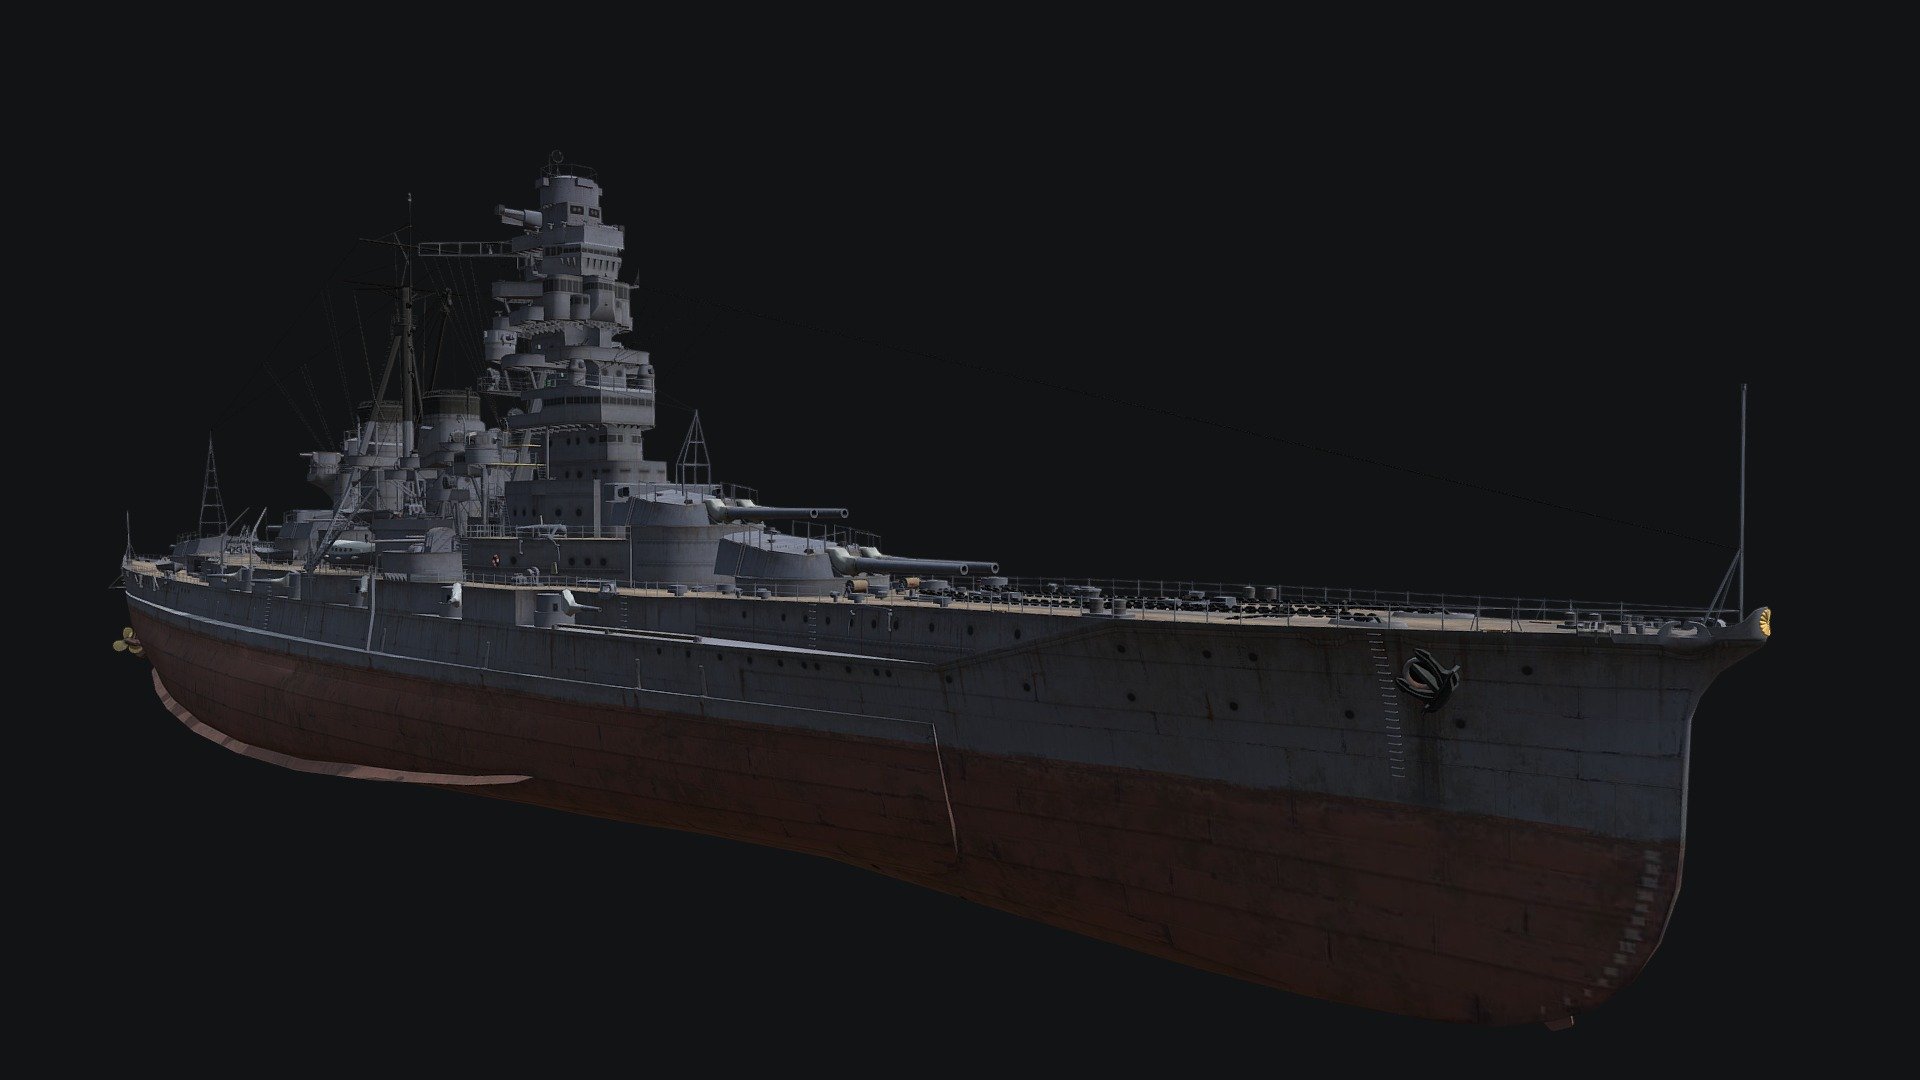 This model was developed by Wargaming for their popular game ‘World of Warships’. Play World of Warships now to send these ships into battle!

Use the following link to start playing!

https://worldofwarships.com/

Kongō — Japanese Tier V battleship.

When she was commissioned, Kongo was the most advanced battlecruiser in the world. She was the first among battlecruisers and battleships to be equipped with 356 mm main battery guns. Unlike previous Japanese dreadnoughts, Kongo received a thinner armor belt while her deck armor and torpedo protection were reinforced 3d model